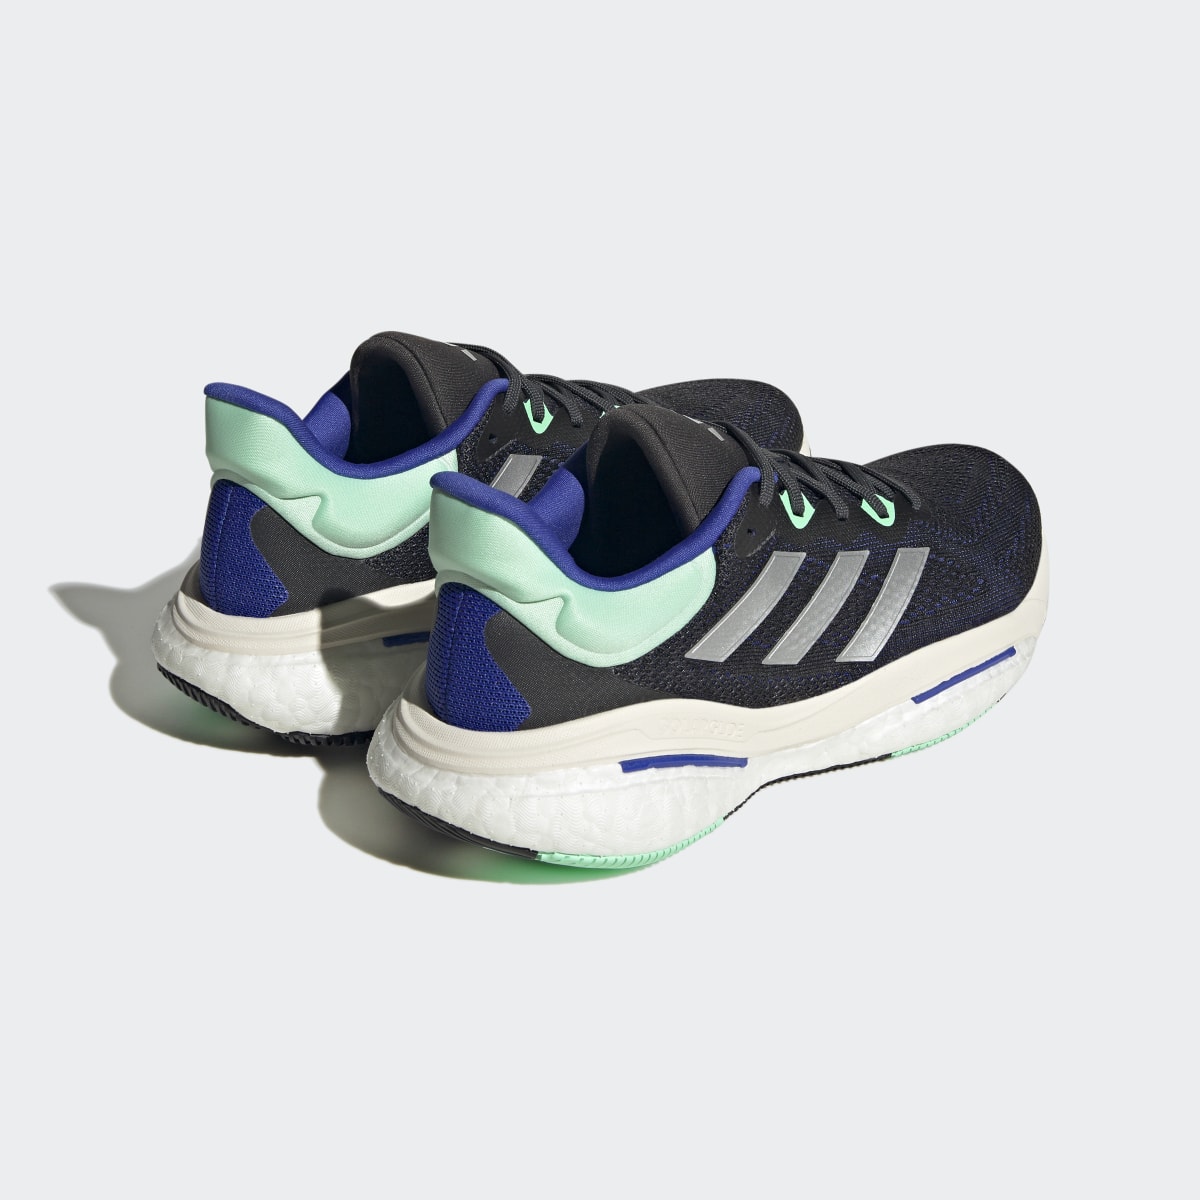 Adidas Solarglide 6 Running Shoes. 6